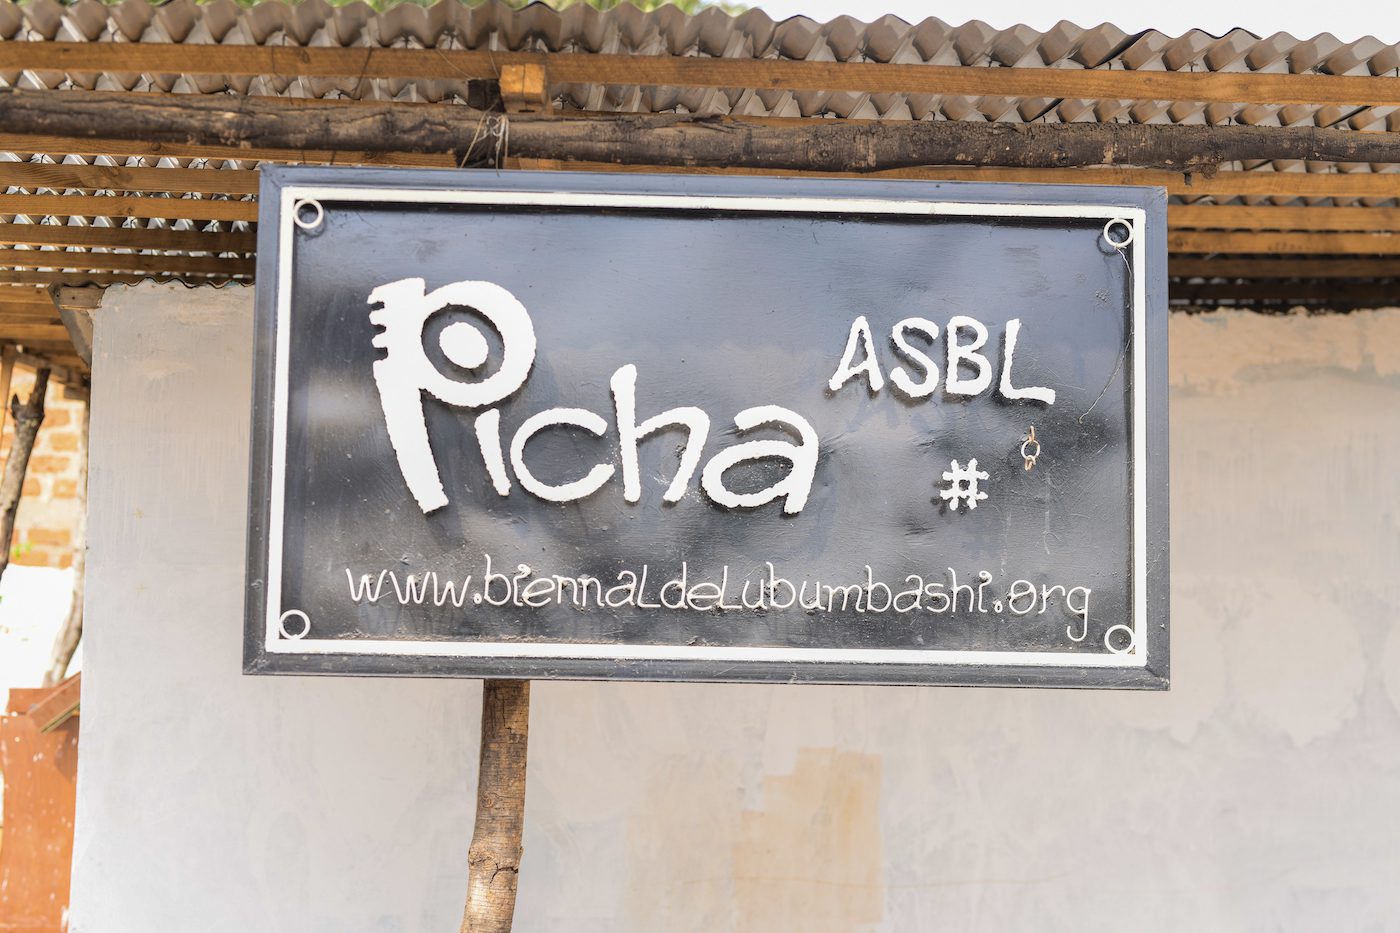 Picha ASBL. Preparations for the 7th Lubumbashi Biennale. Courtesy of Nicolas, Photographer of the Biennale.